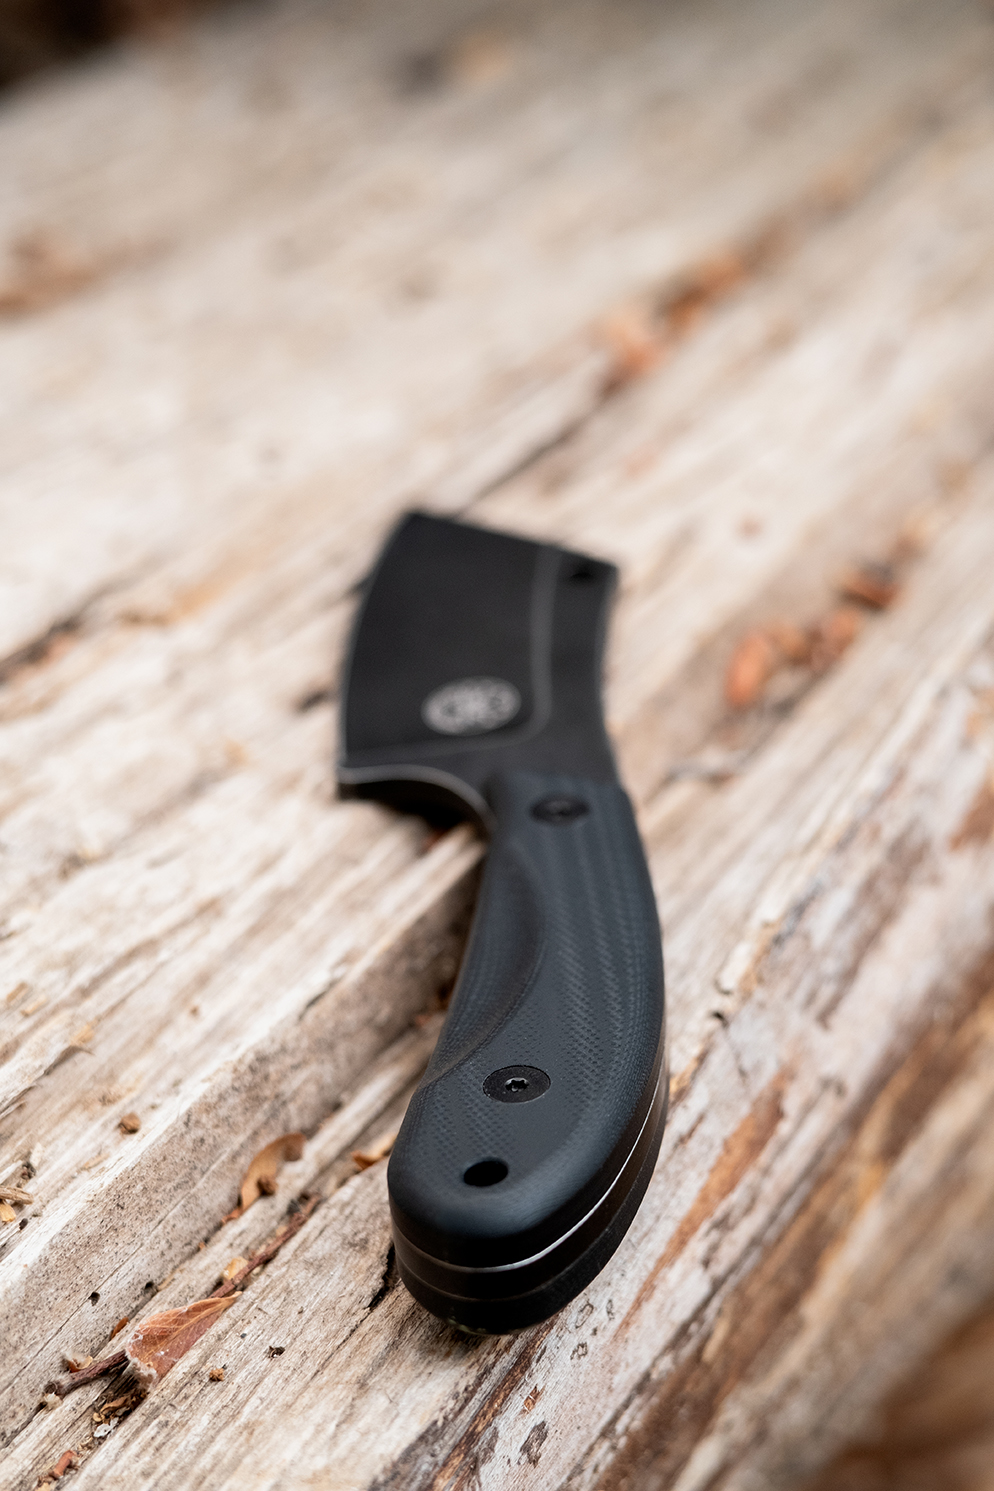 Sharp Knives - Everything You Need To Know - Off-Grid Knives